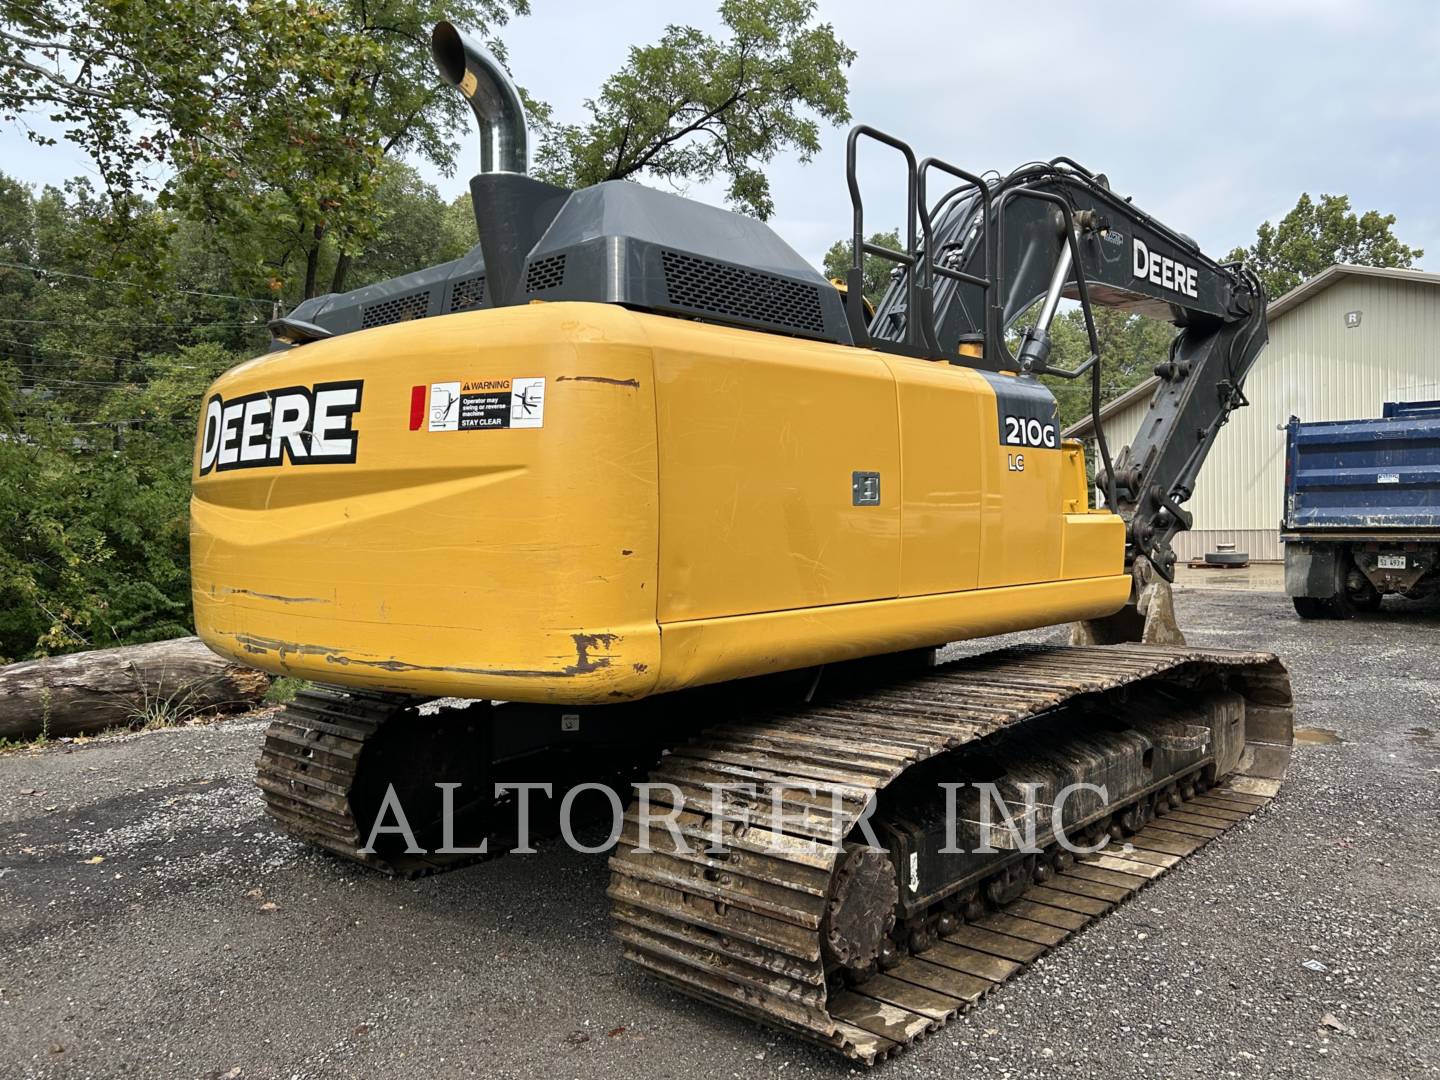 2019 DEE 210G LC &#8211; #10088981